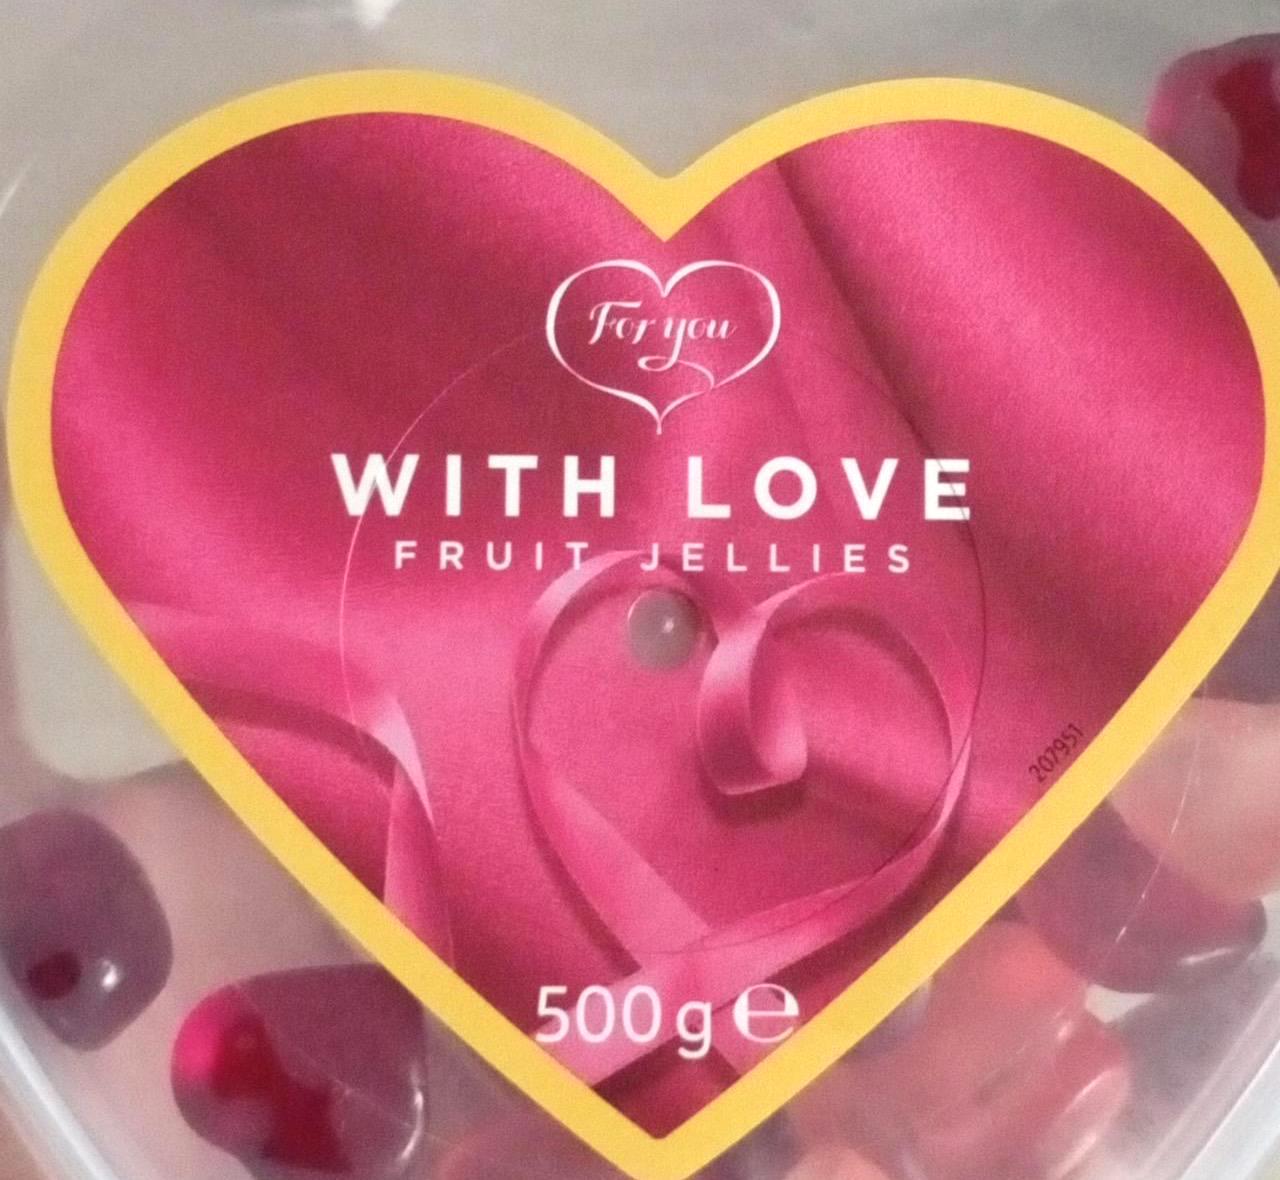 Képek - With love fruit jellies For you